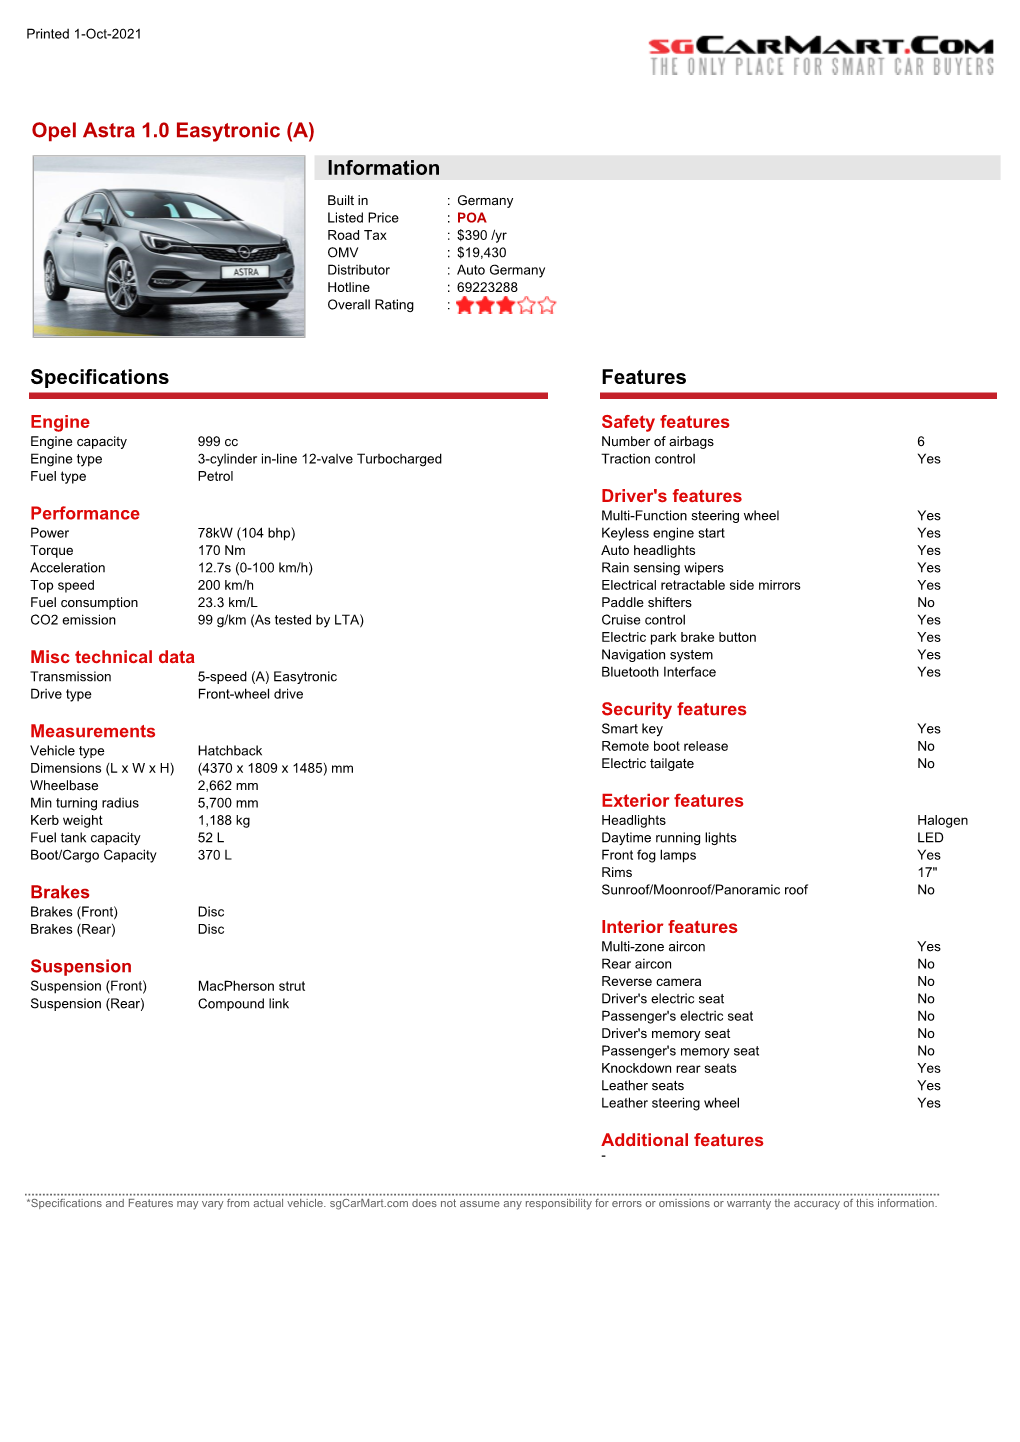 Opel Astra 1.0 Easytronic (A) Information Specifications Features